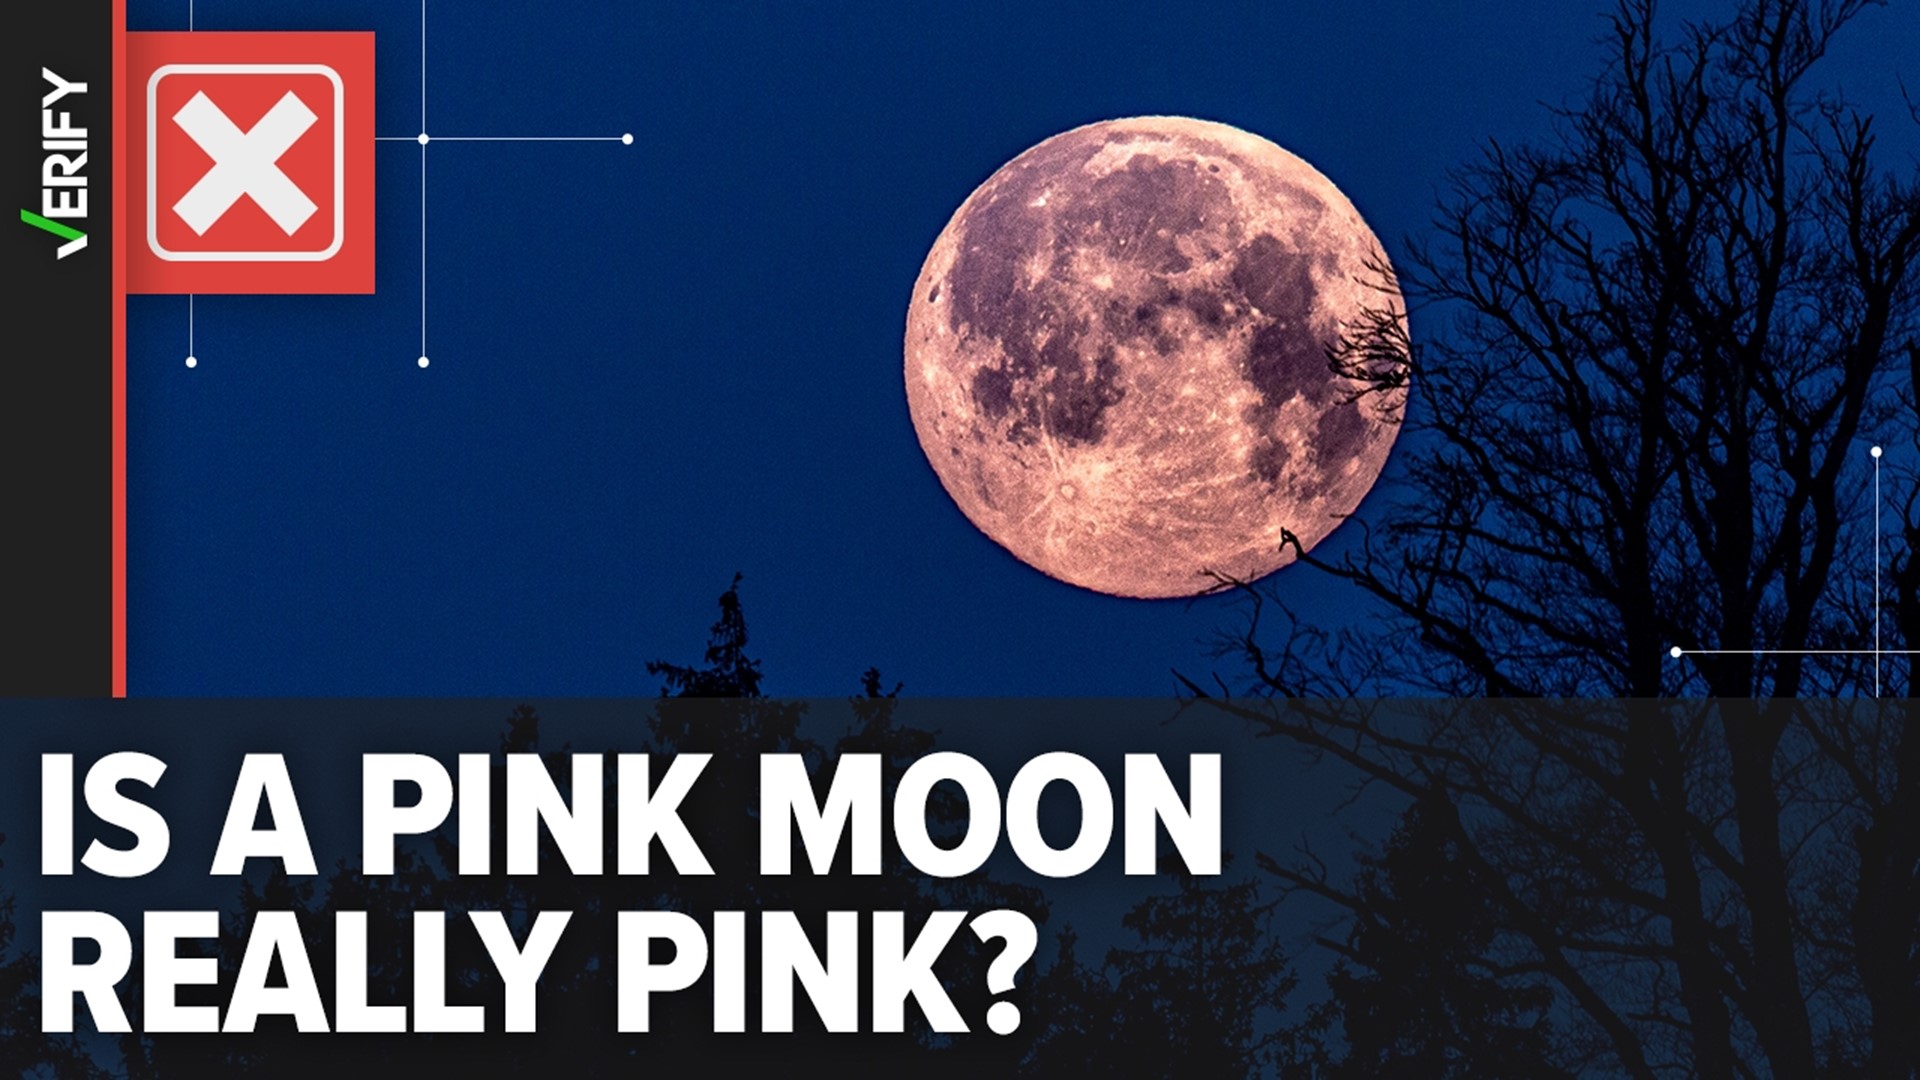 The “pink moon” doesn’t actually look pink. It’s the nickname of the full moon that occurs every April and is named after a pink springtime flower.